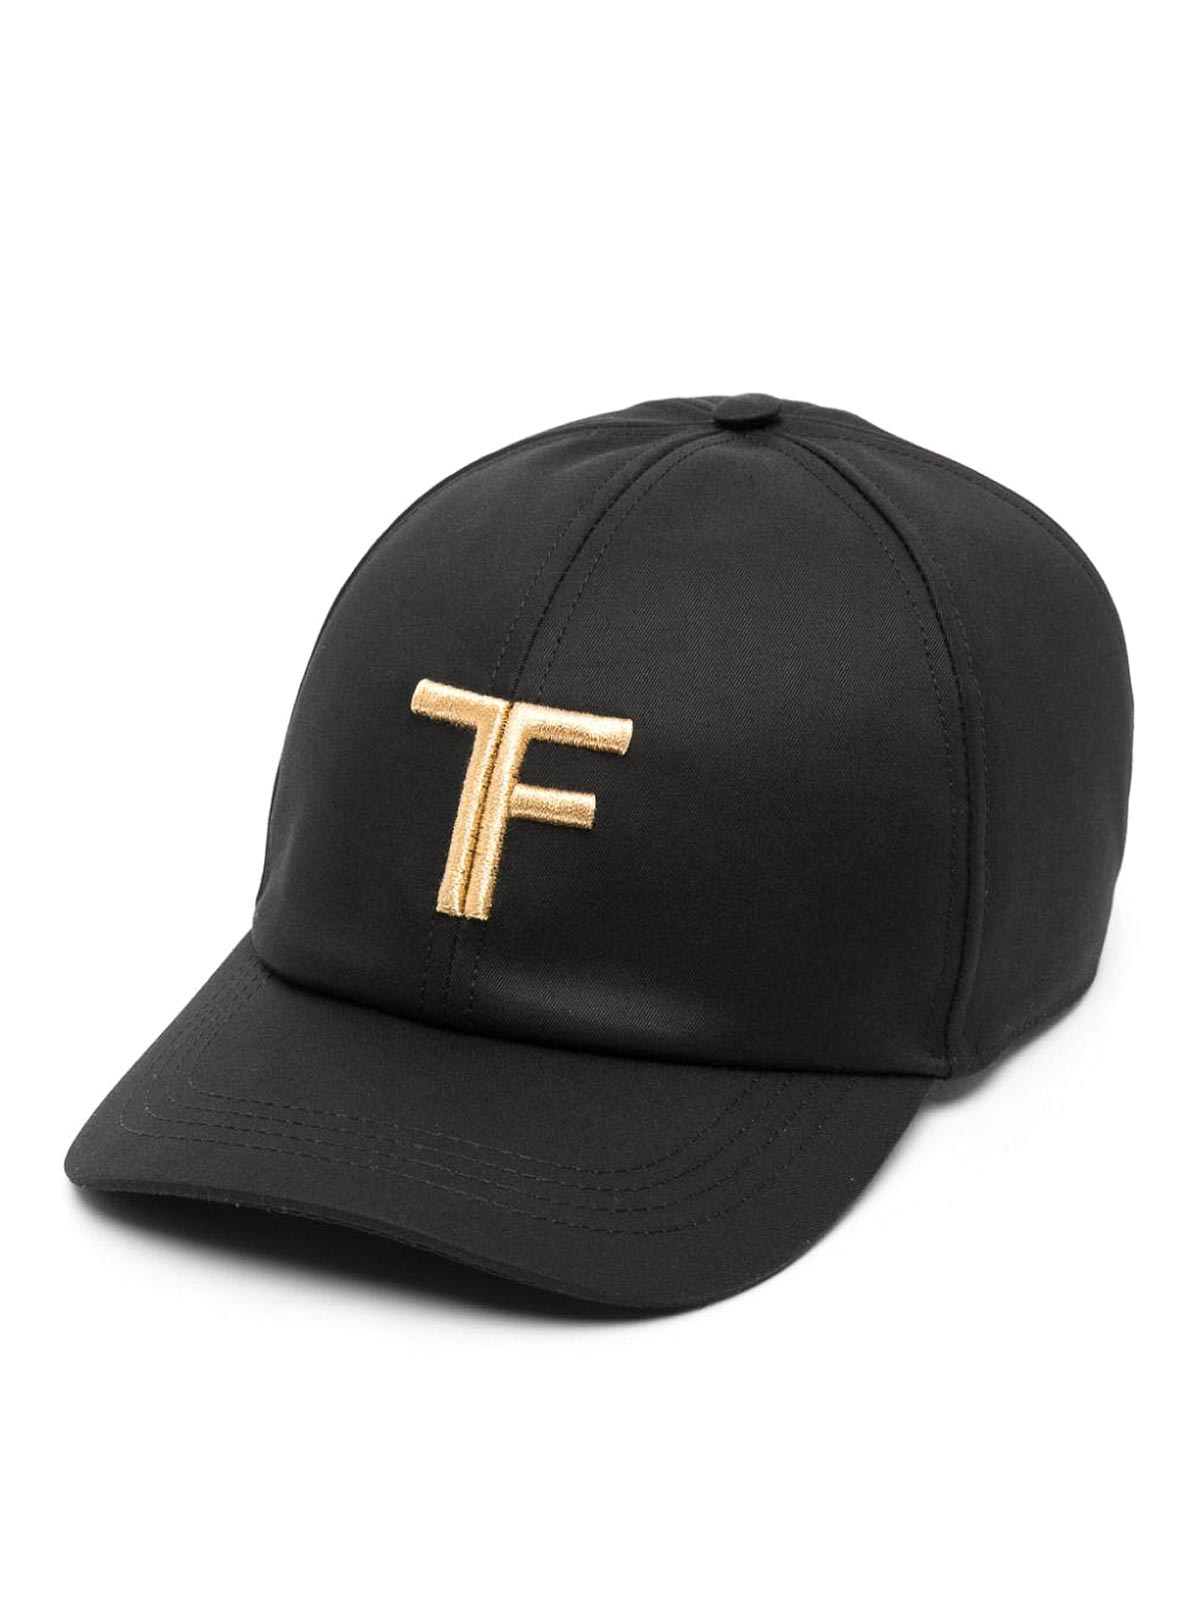 Hats & caps Tom Ford - Tom ford hat - MH003TCN038G3NY04